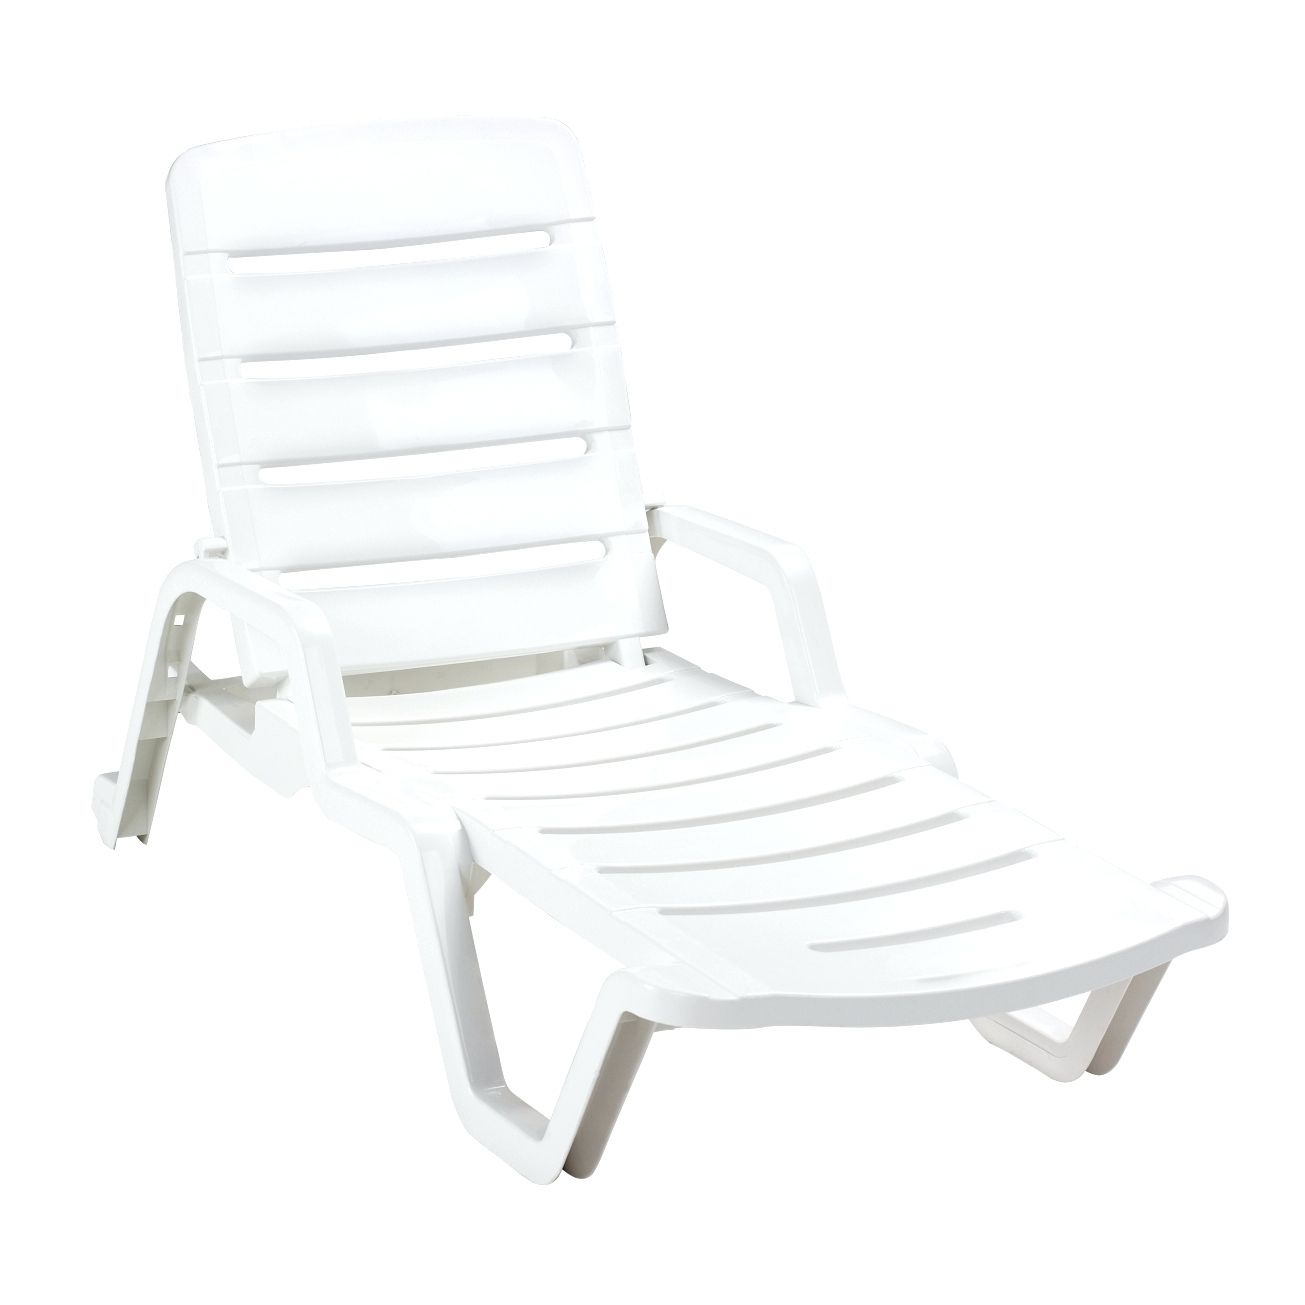 Pvc Outdoor Lounge Chairs • Lounge Chairs Ideas Regarding 2017 Pvc Outdoor Chaise Lounge Chairs (View 1 of 15)